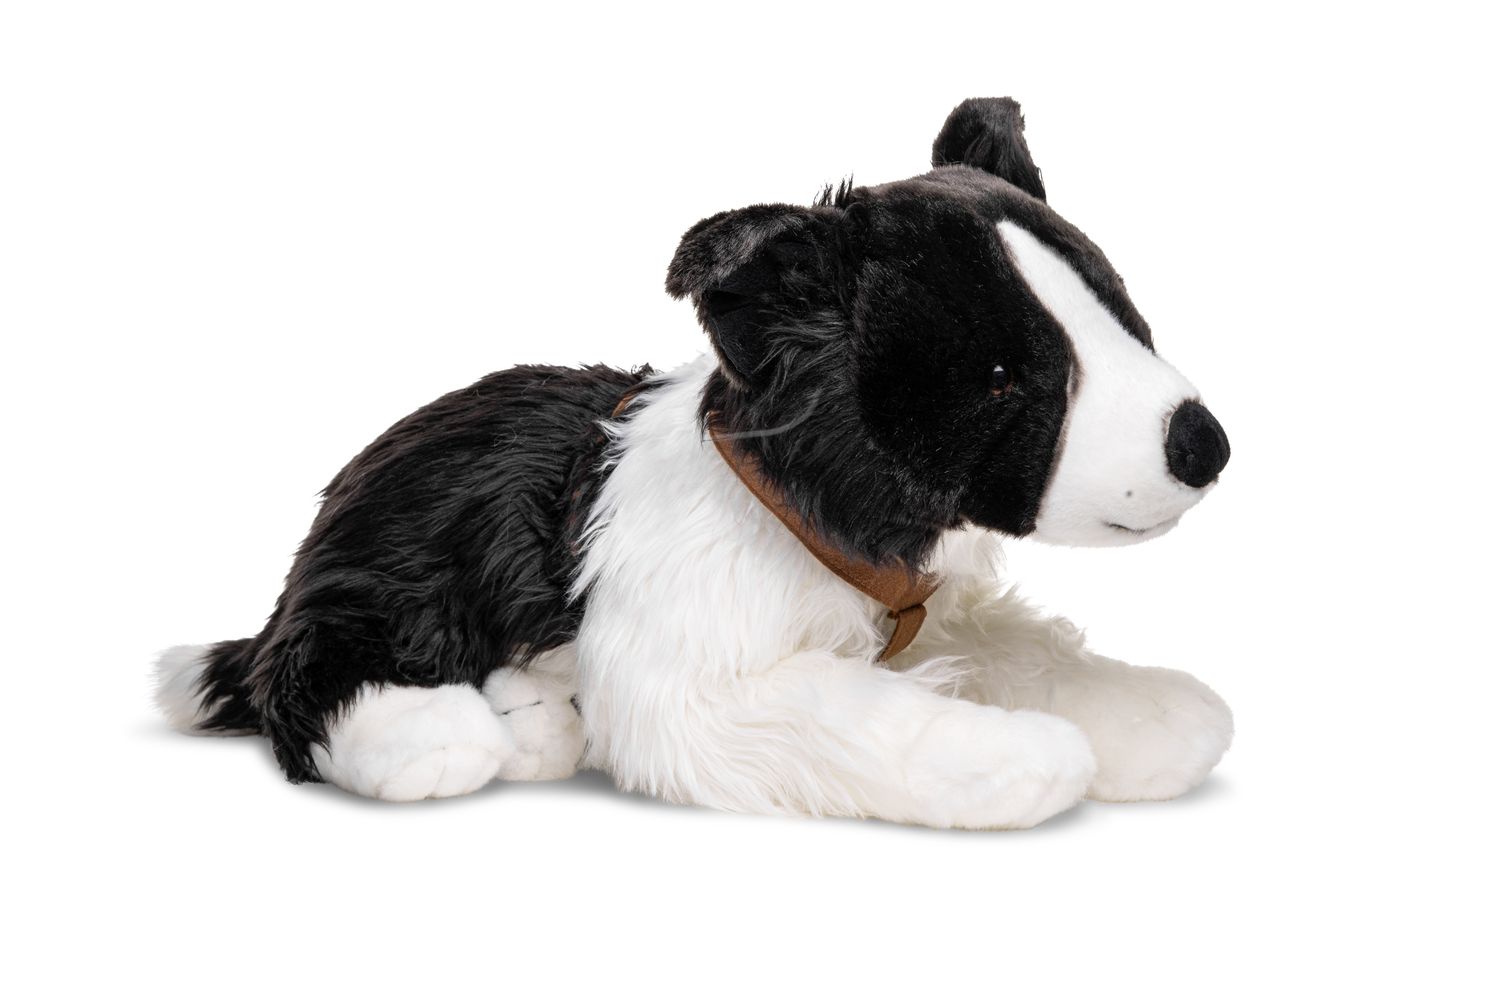 NEW PLUSH KEEL 30cm SOFT STANDING BORDER COLLIE PUPPY DOG WITH LEAD TOY CUTE 